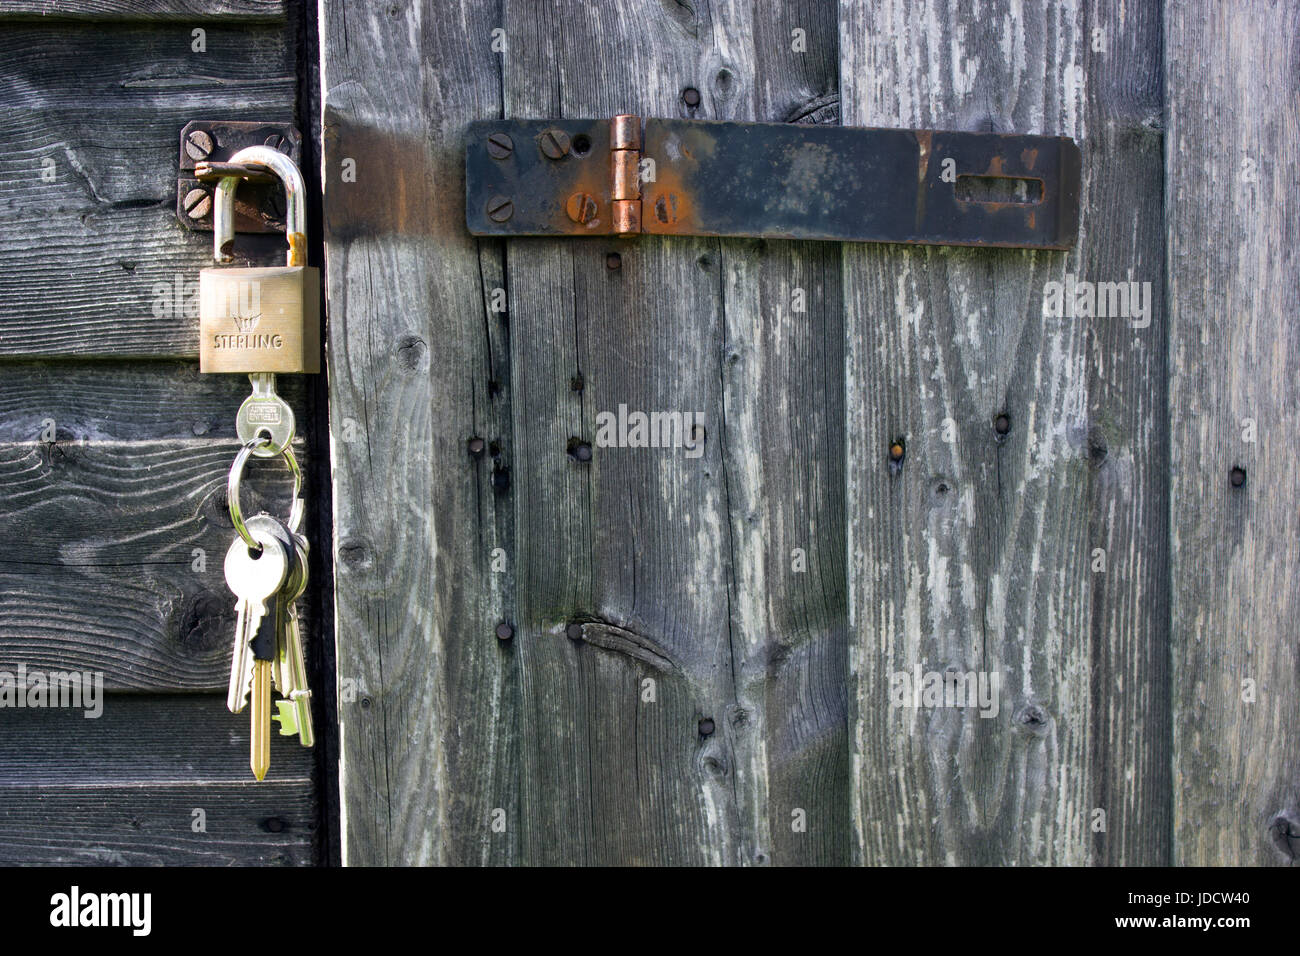 Black hasp and staple or clasp, with padlock and keys. The garden shed door is unlocked and the keys are still in the lock. The staple, clasp is open Stock Photo